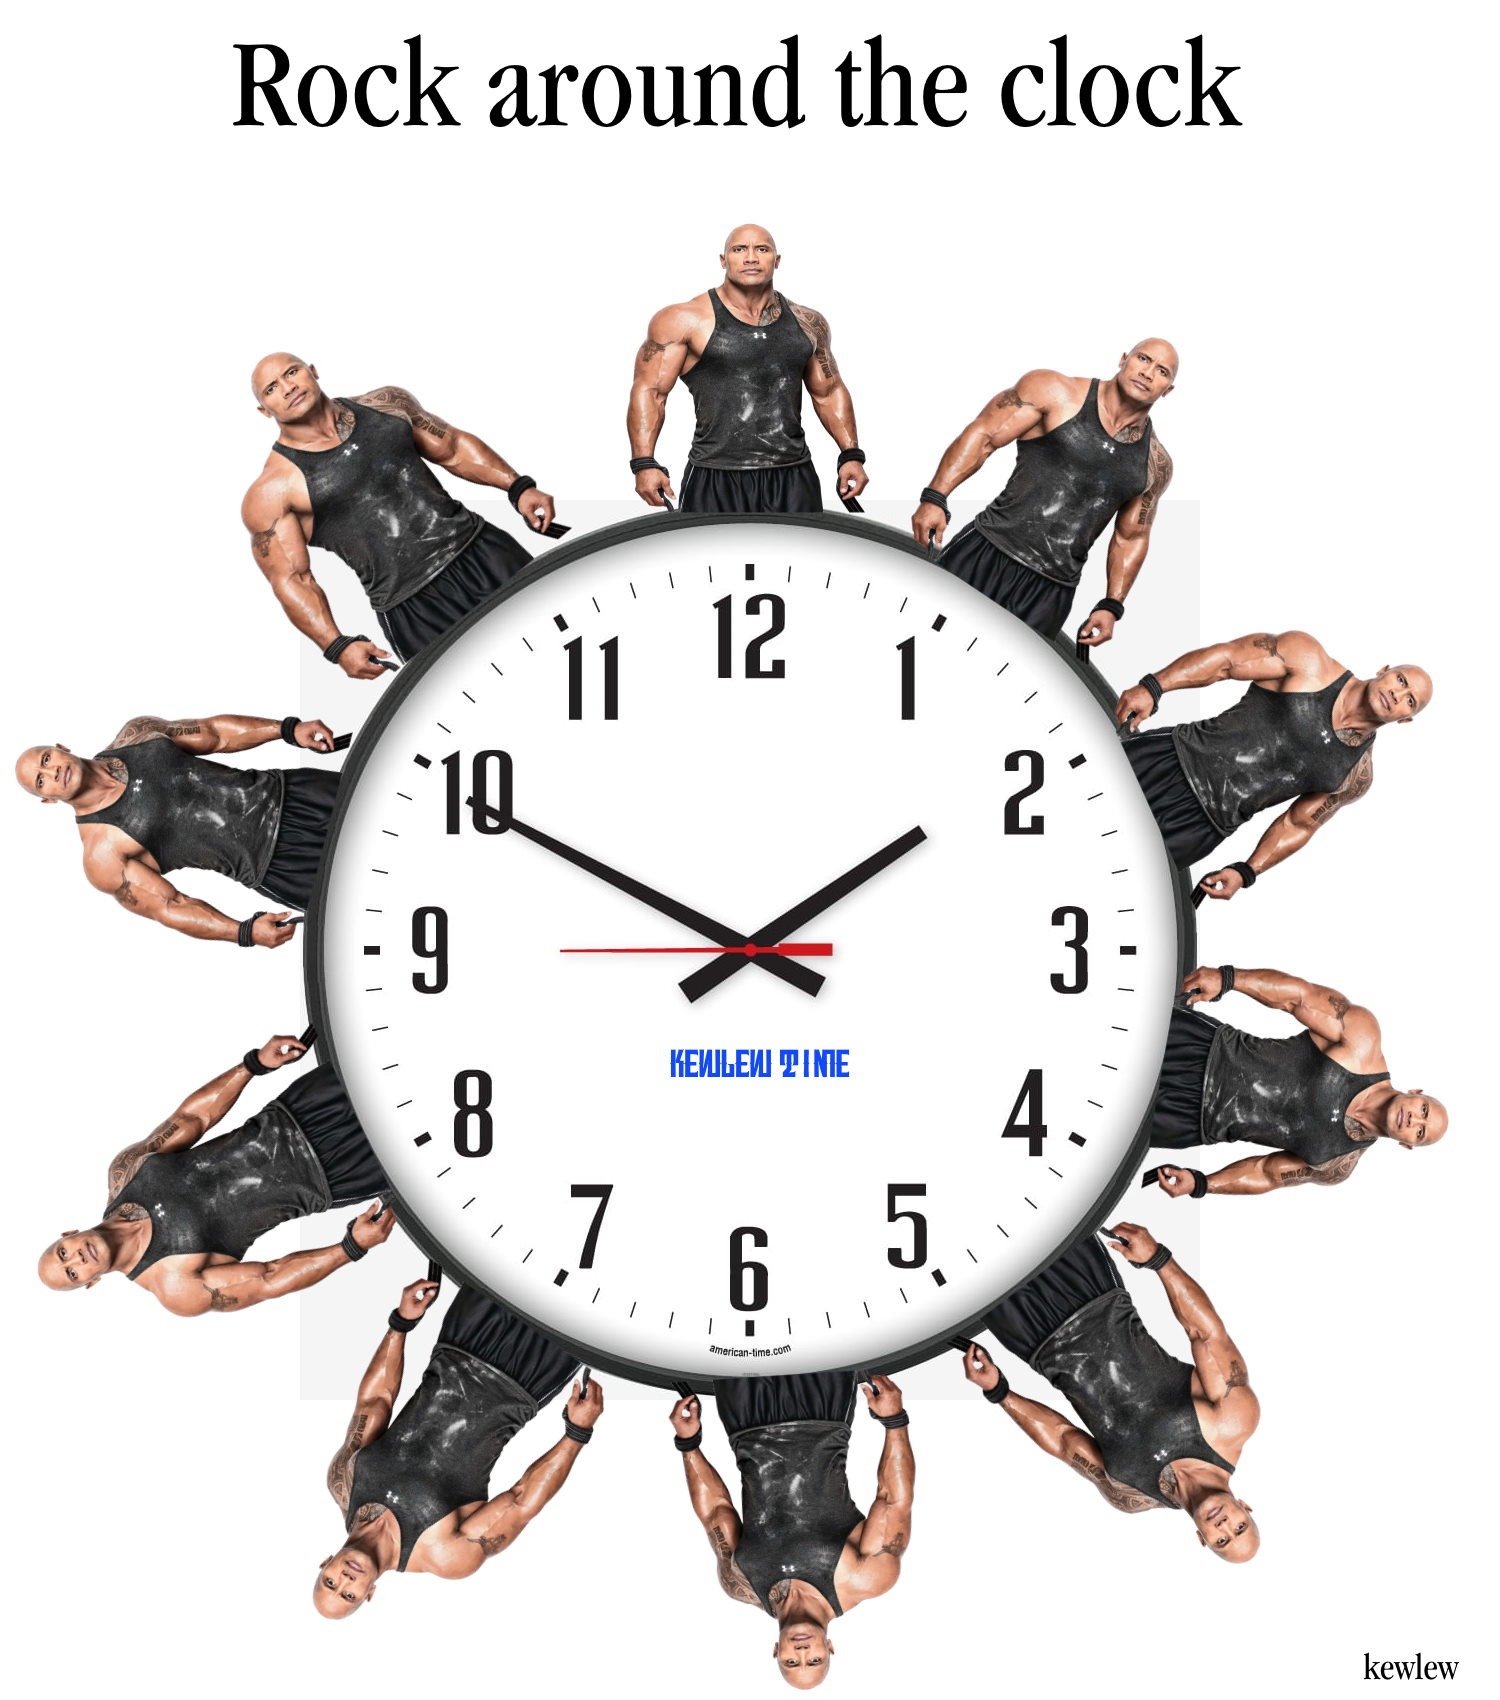 Rock around the clock | image tagged in rock around the clock,the rock,kewlew | made w/ Imgflip meme maker